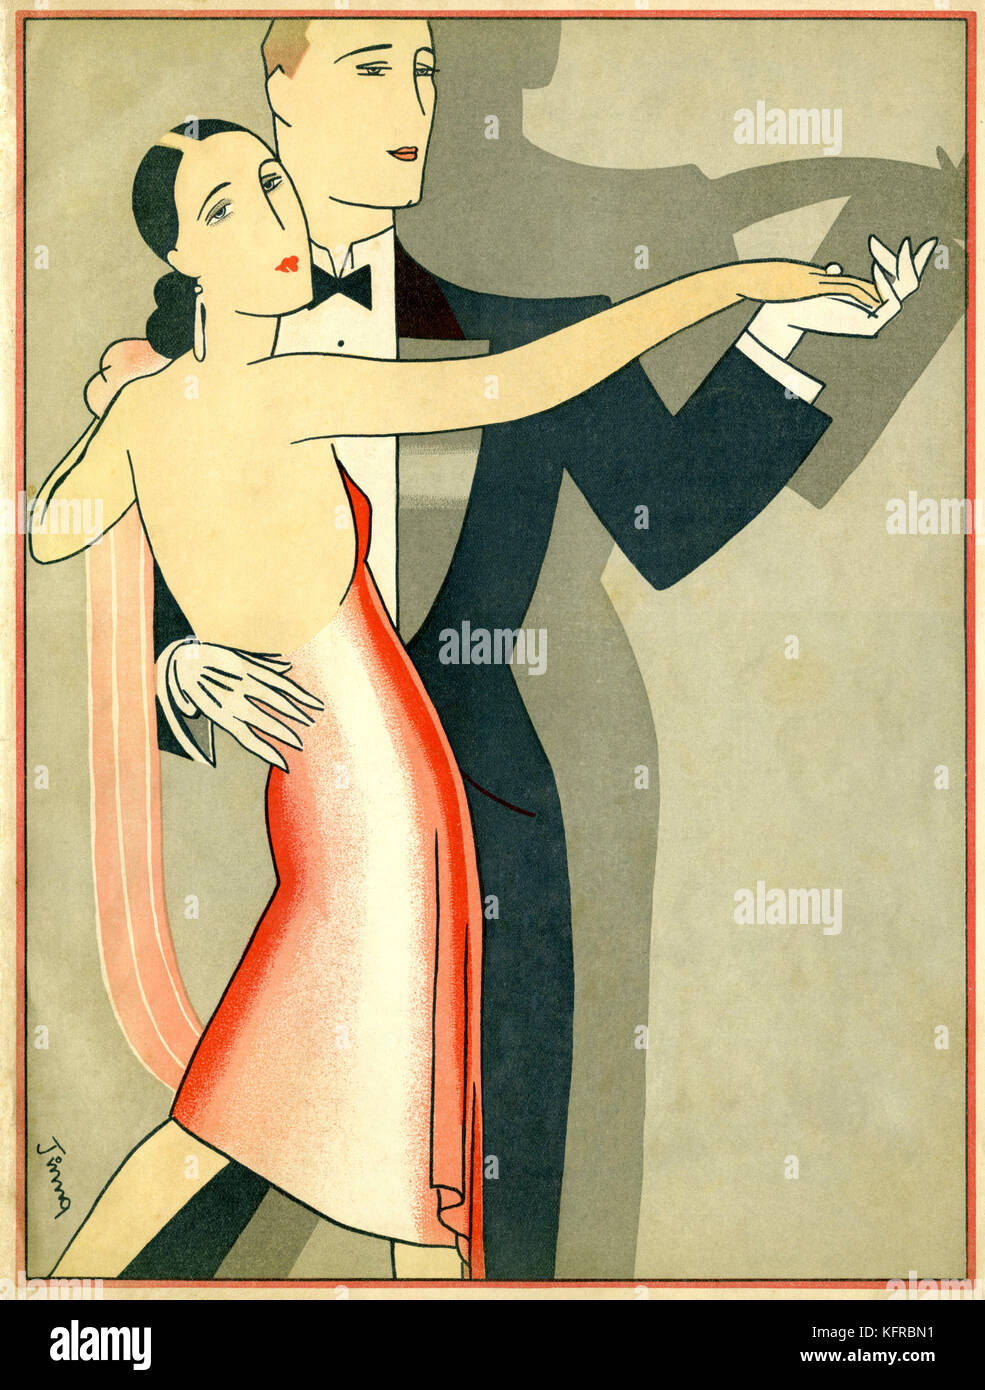 Couple dancing in evening dress, late 1920s / early 1930s. Czech illustration. Artist unknown. Stock Photo